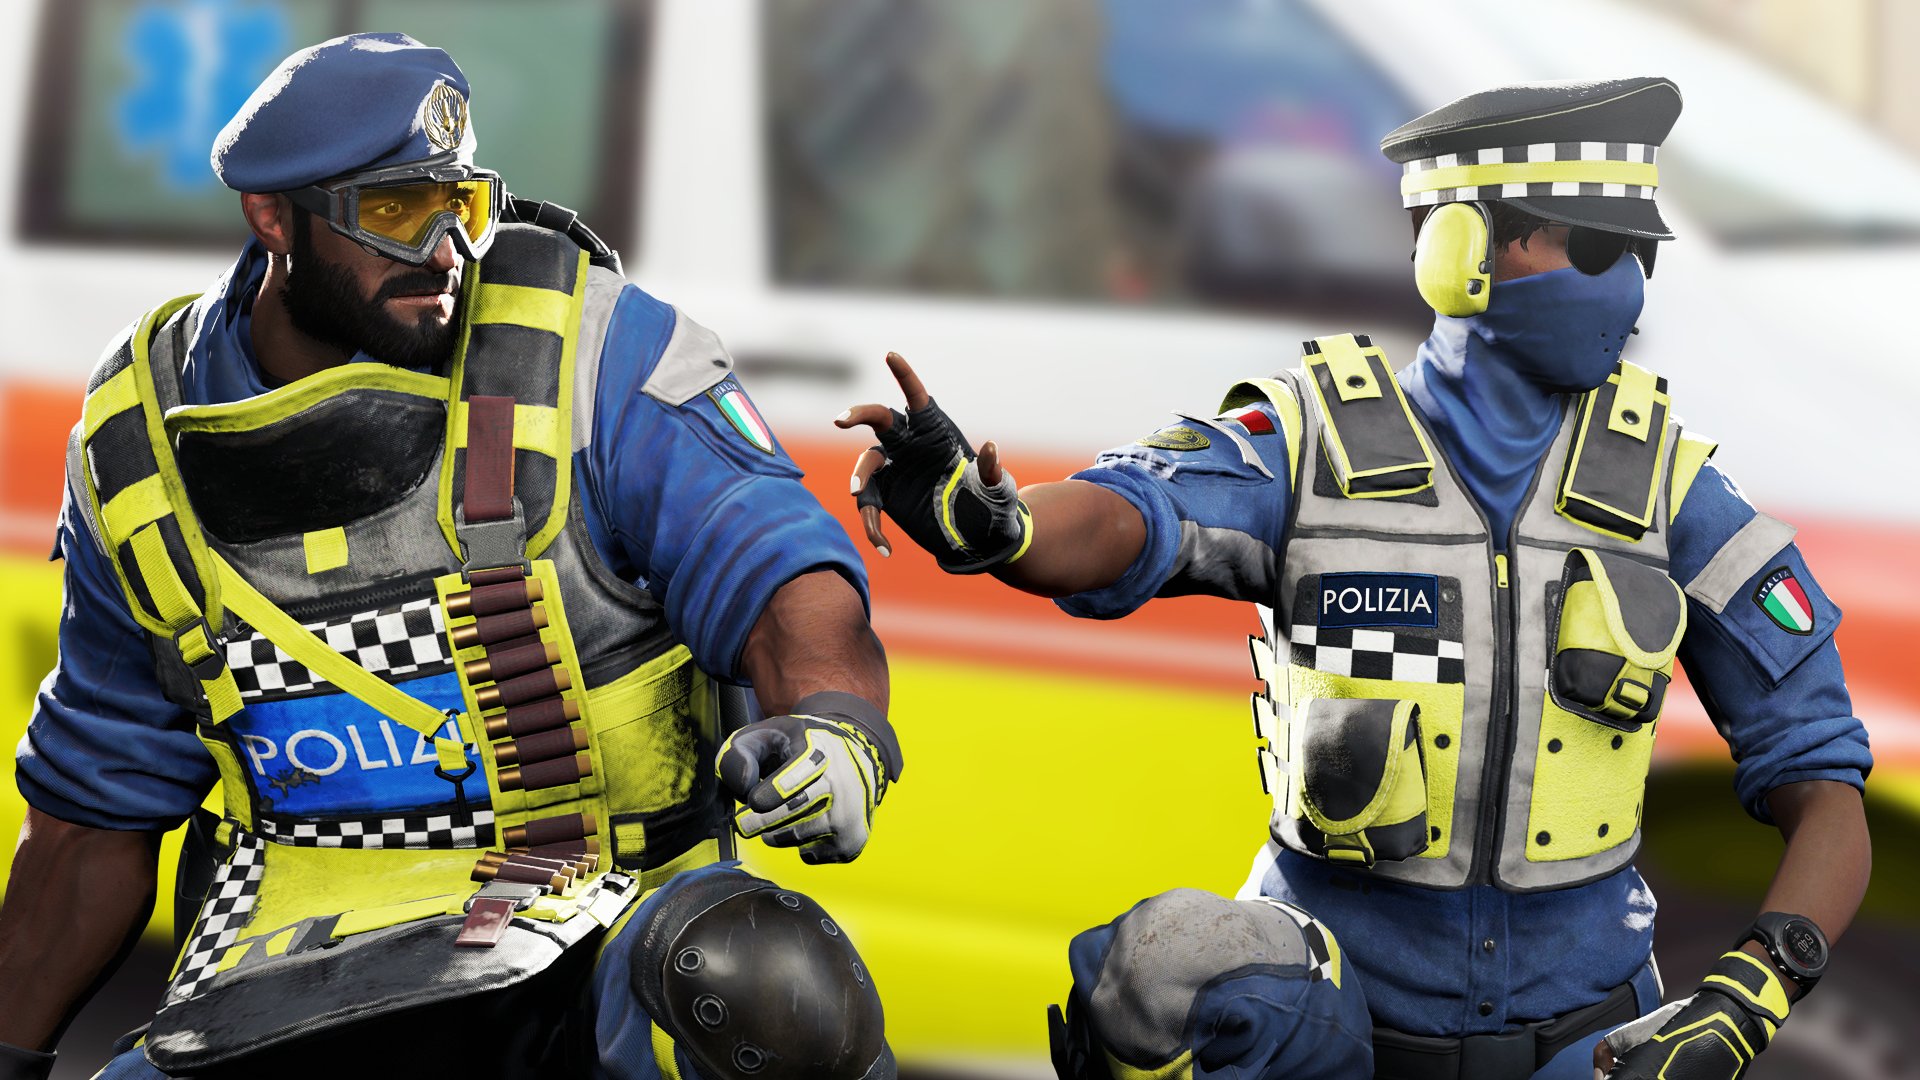 Stay in control with the Bluecoat Bundle.Contains the Enforcement uniforms ...